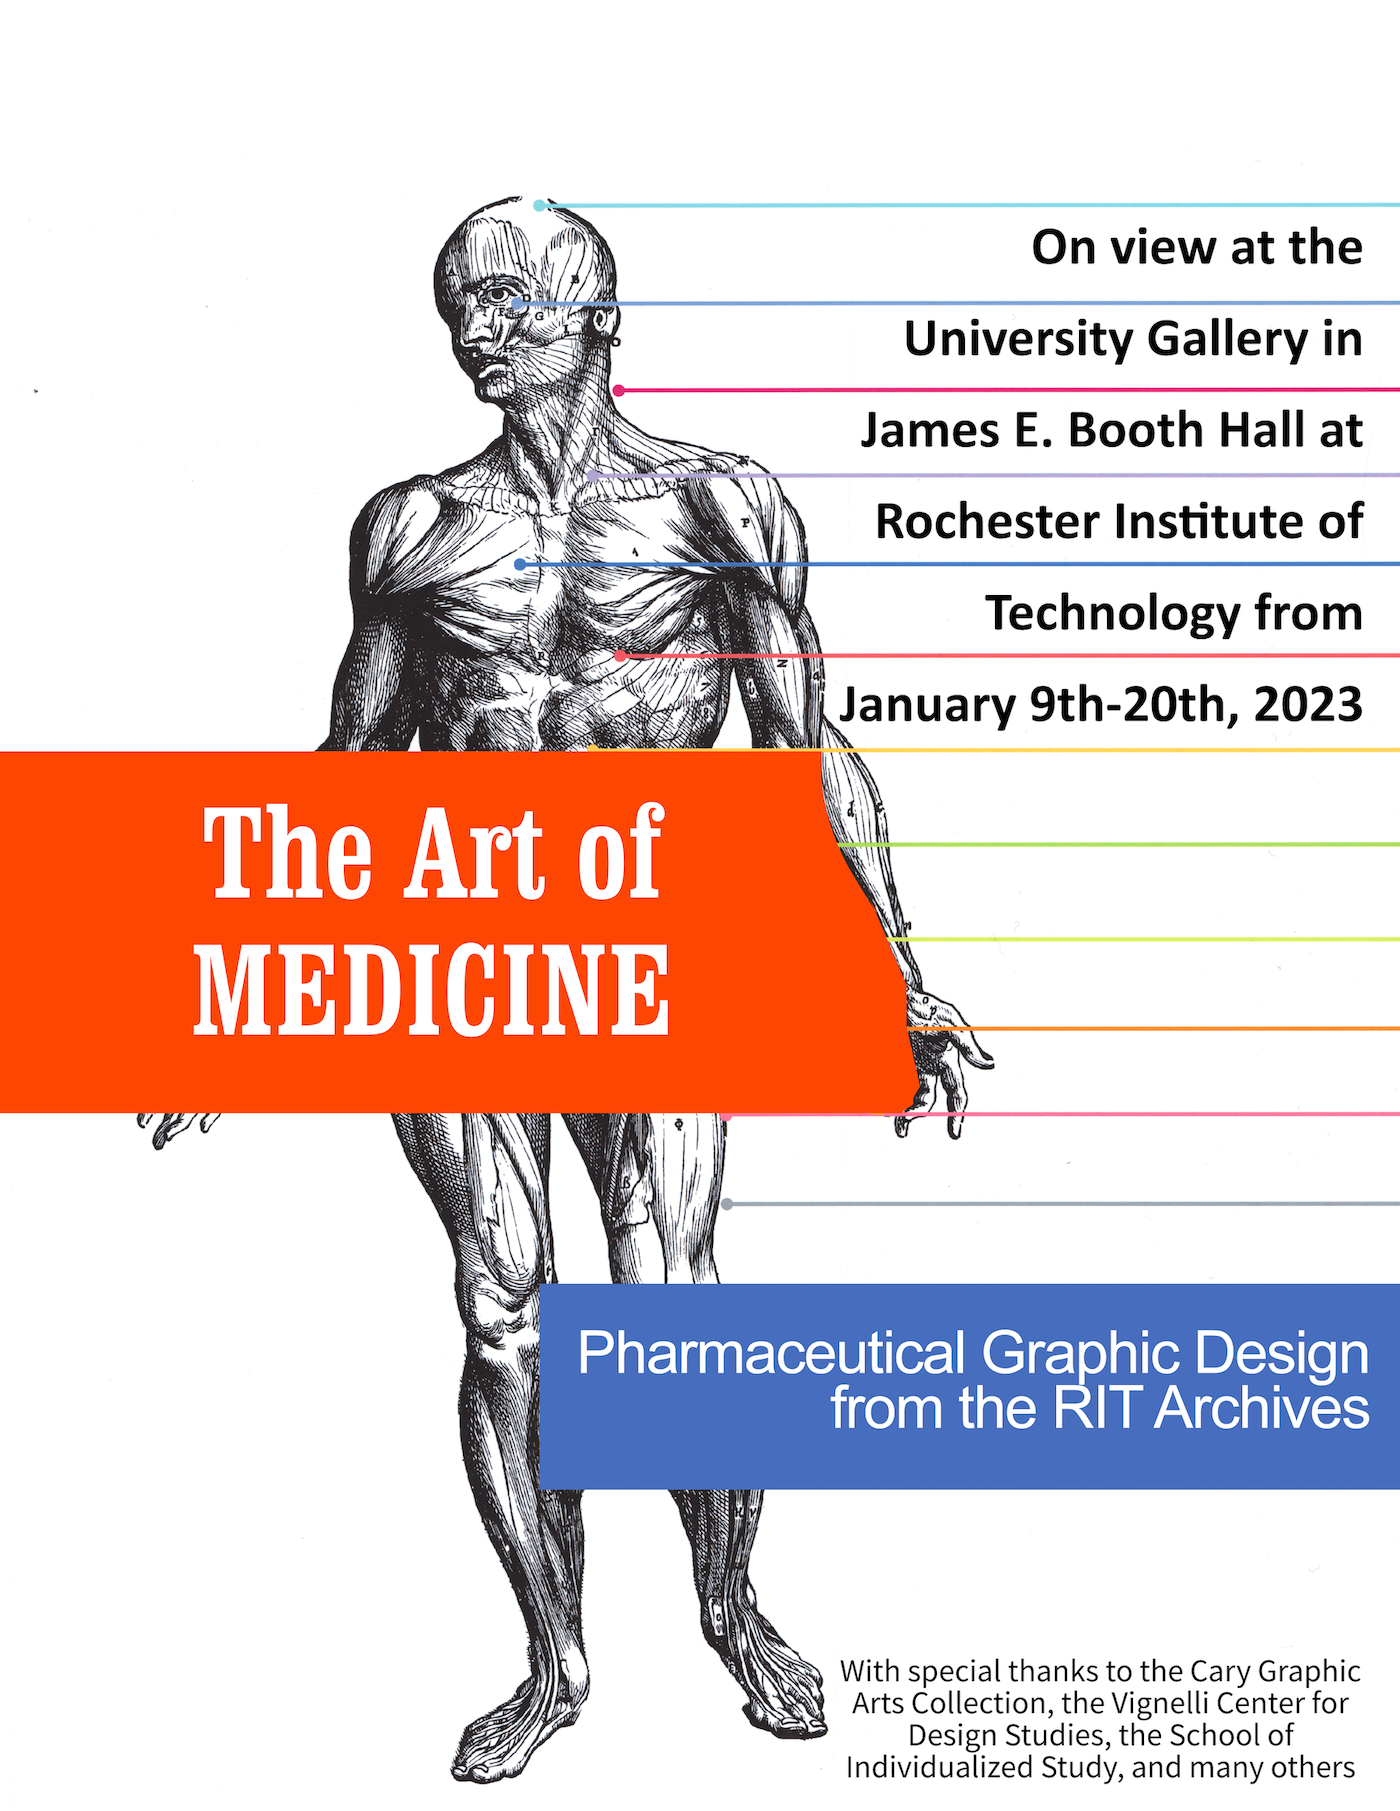 a poster design for The Art of Medicine - Pharmaceutical Graphic Design from the RIT Archives